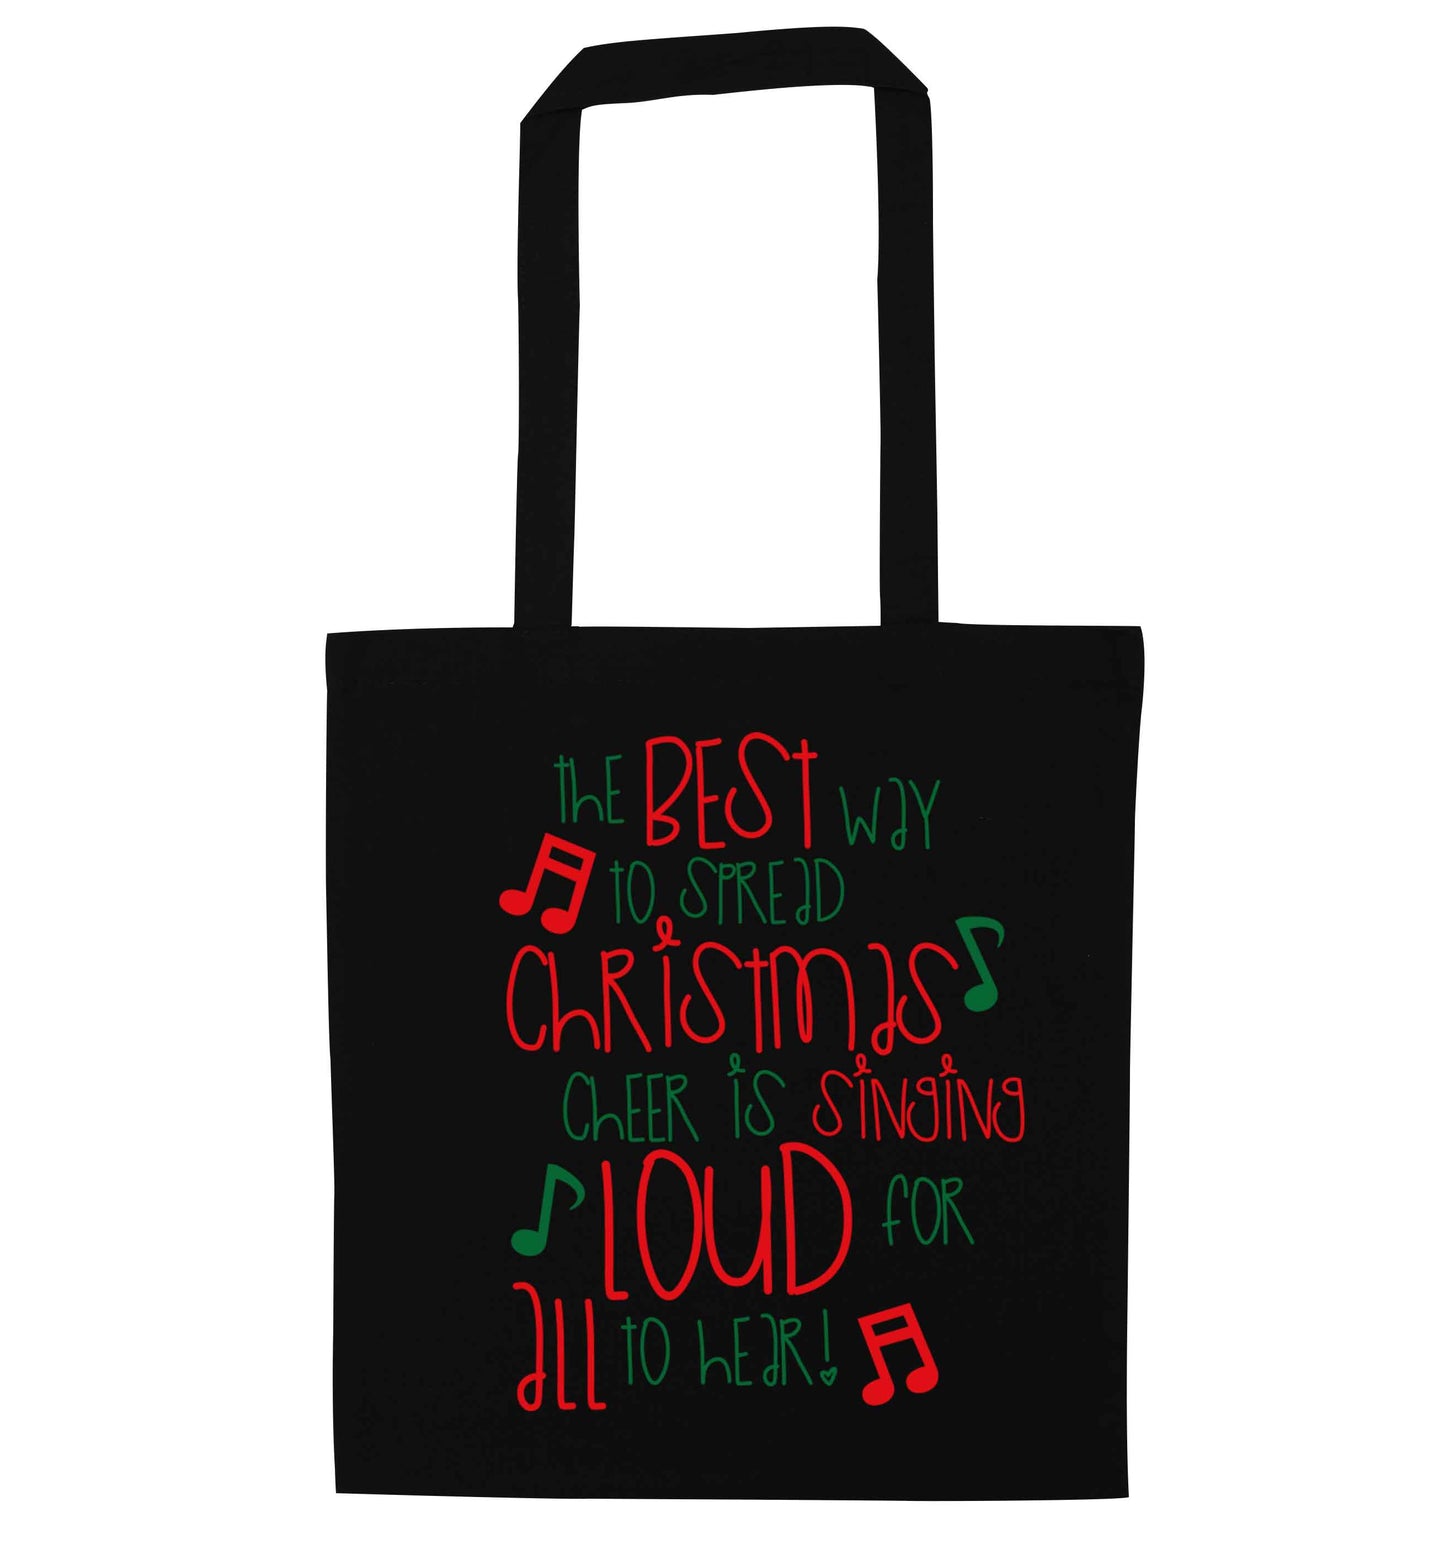 The best way to spread Christmas cheer is singing loud for all to hear black tote bag